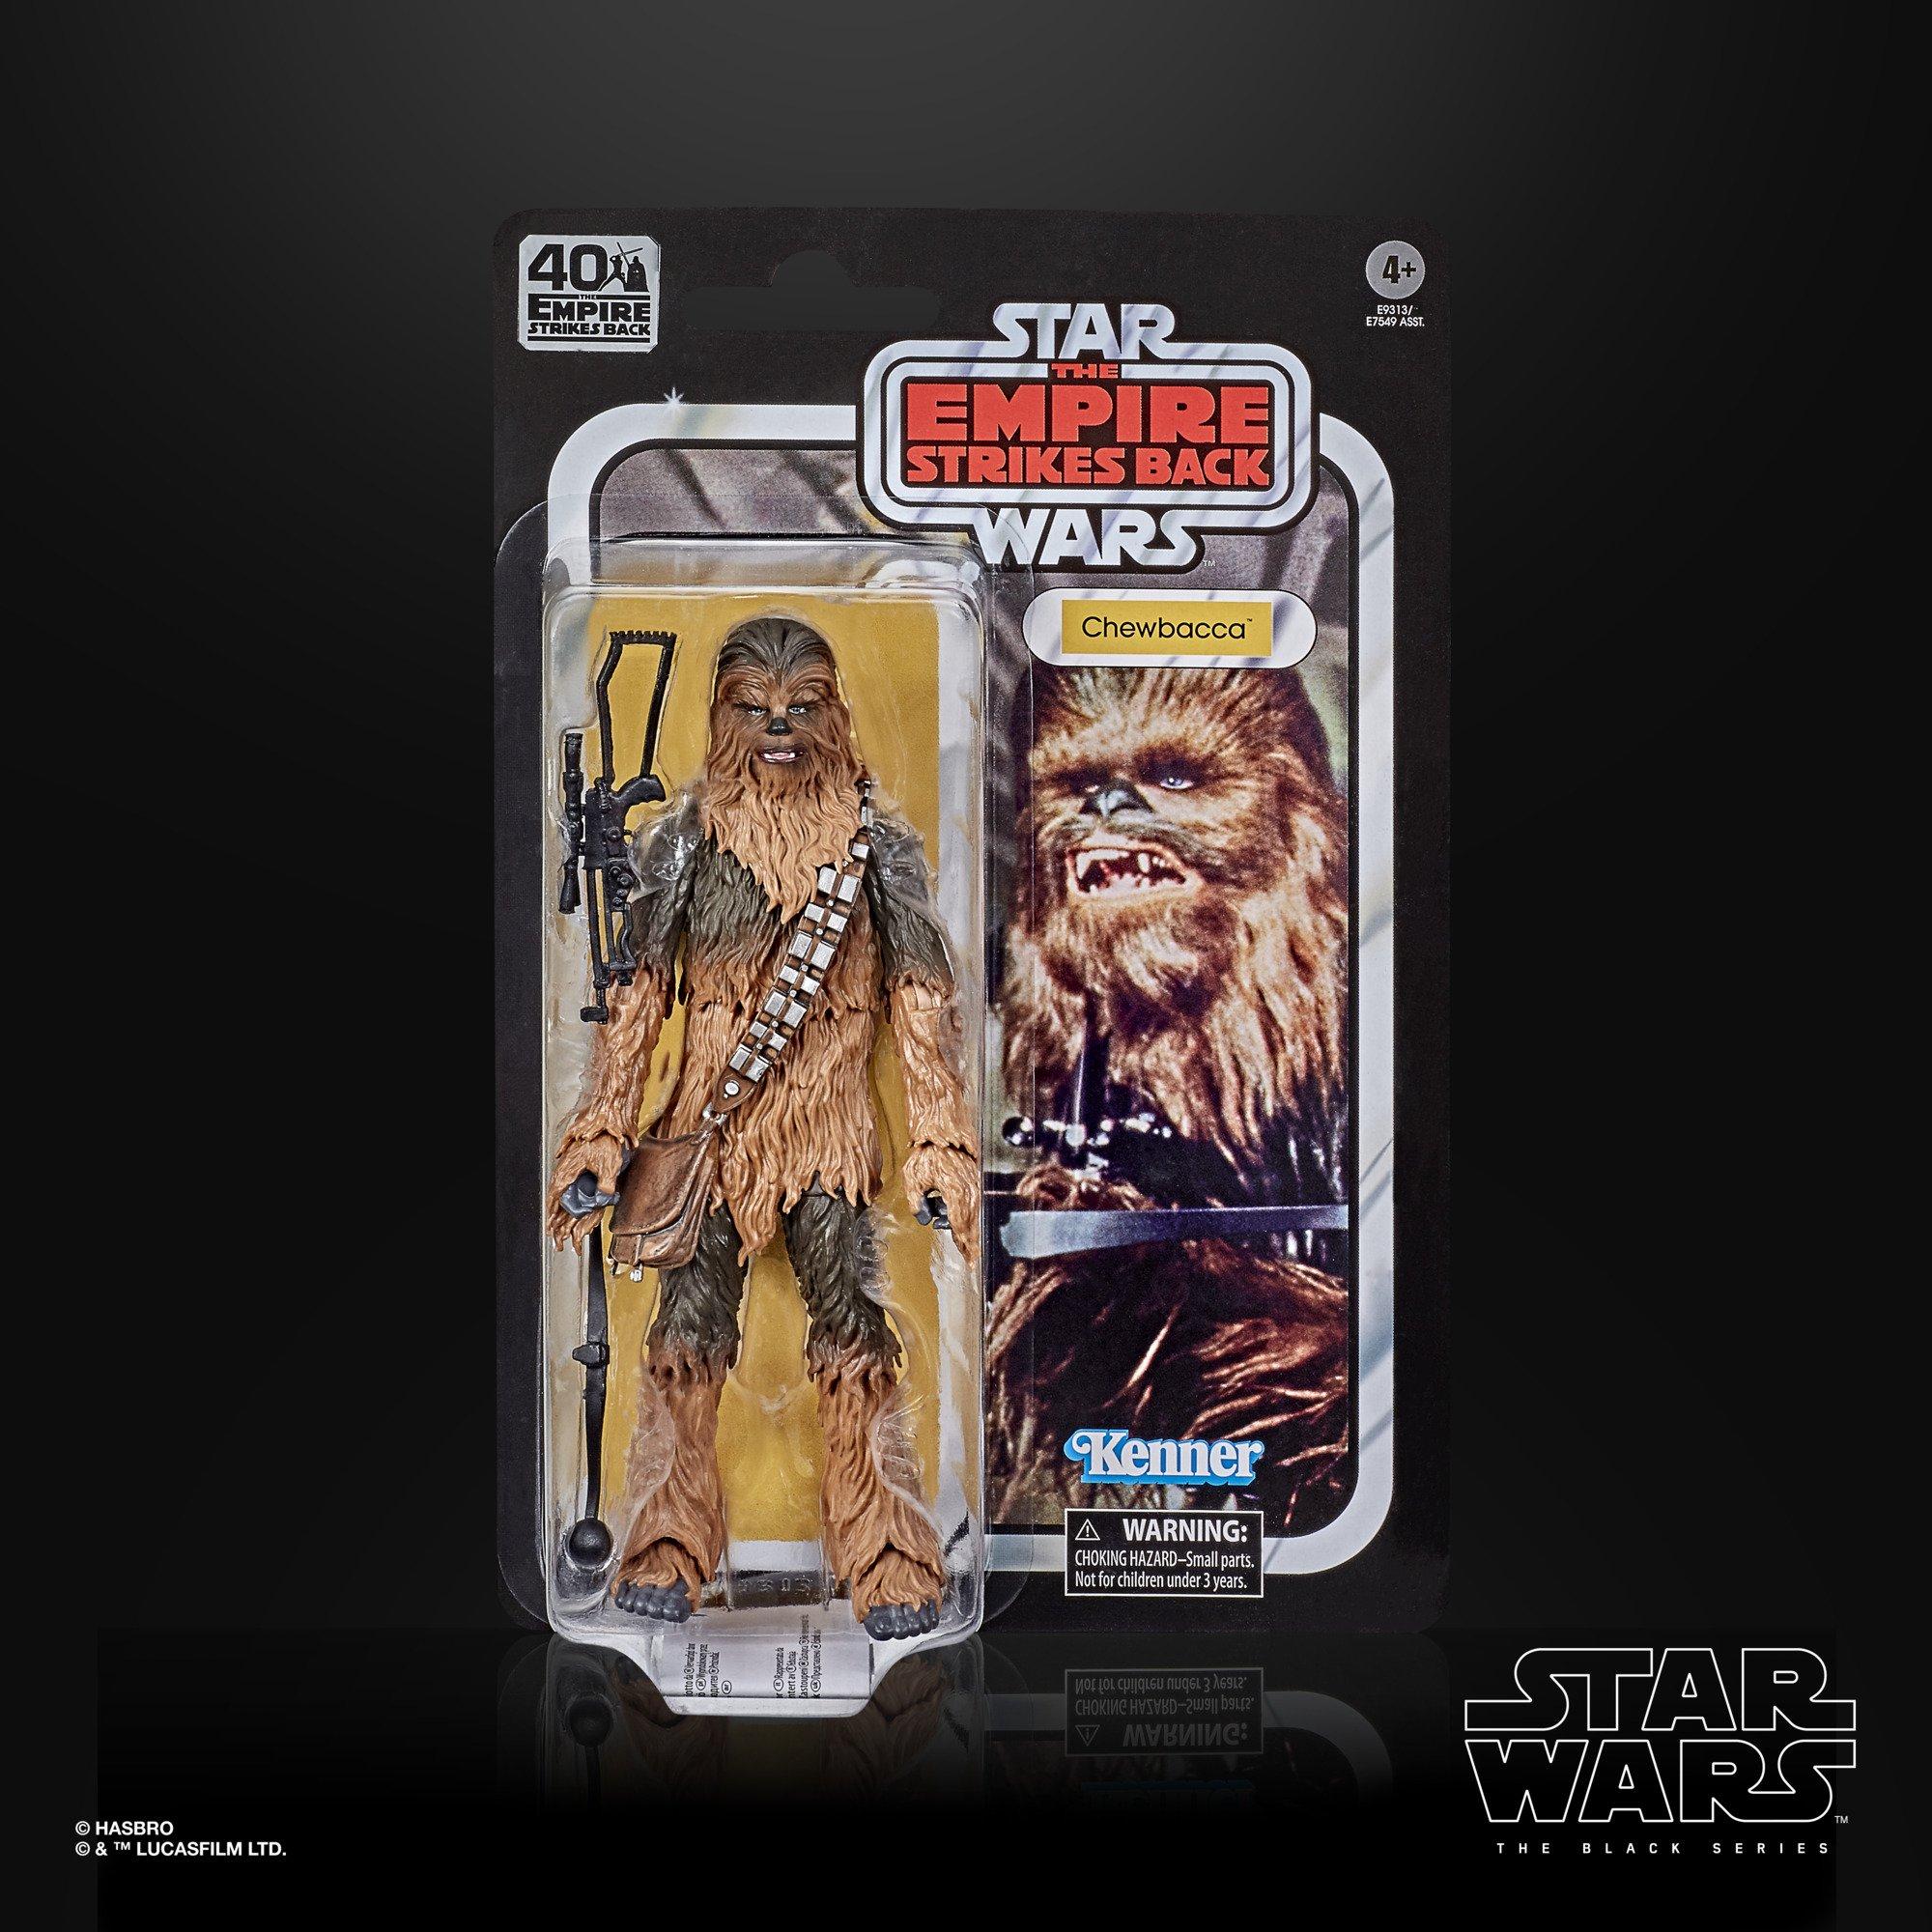 Hasbro Star Wars: The Black Series The Empire Strikes Back 40th Anniversary Chewbacca 6-in Action Figure